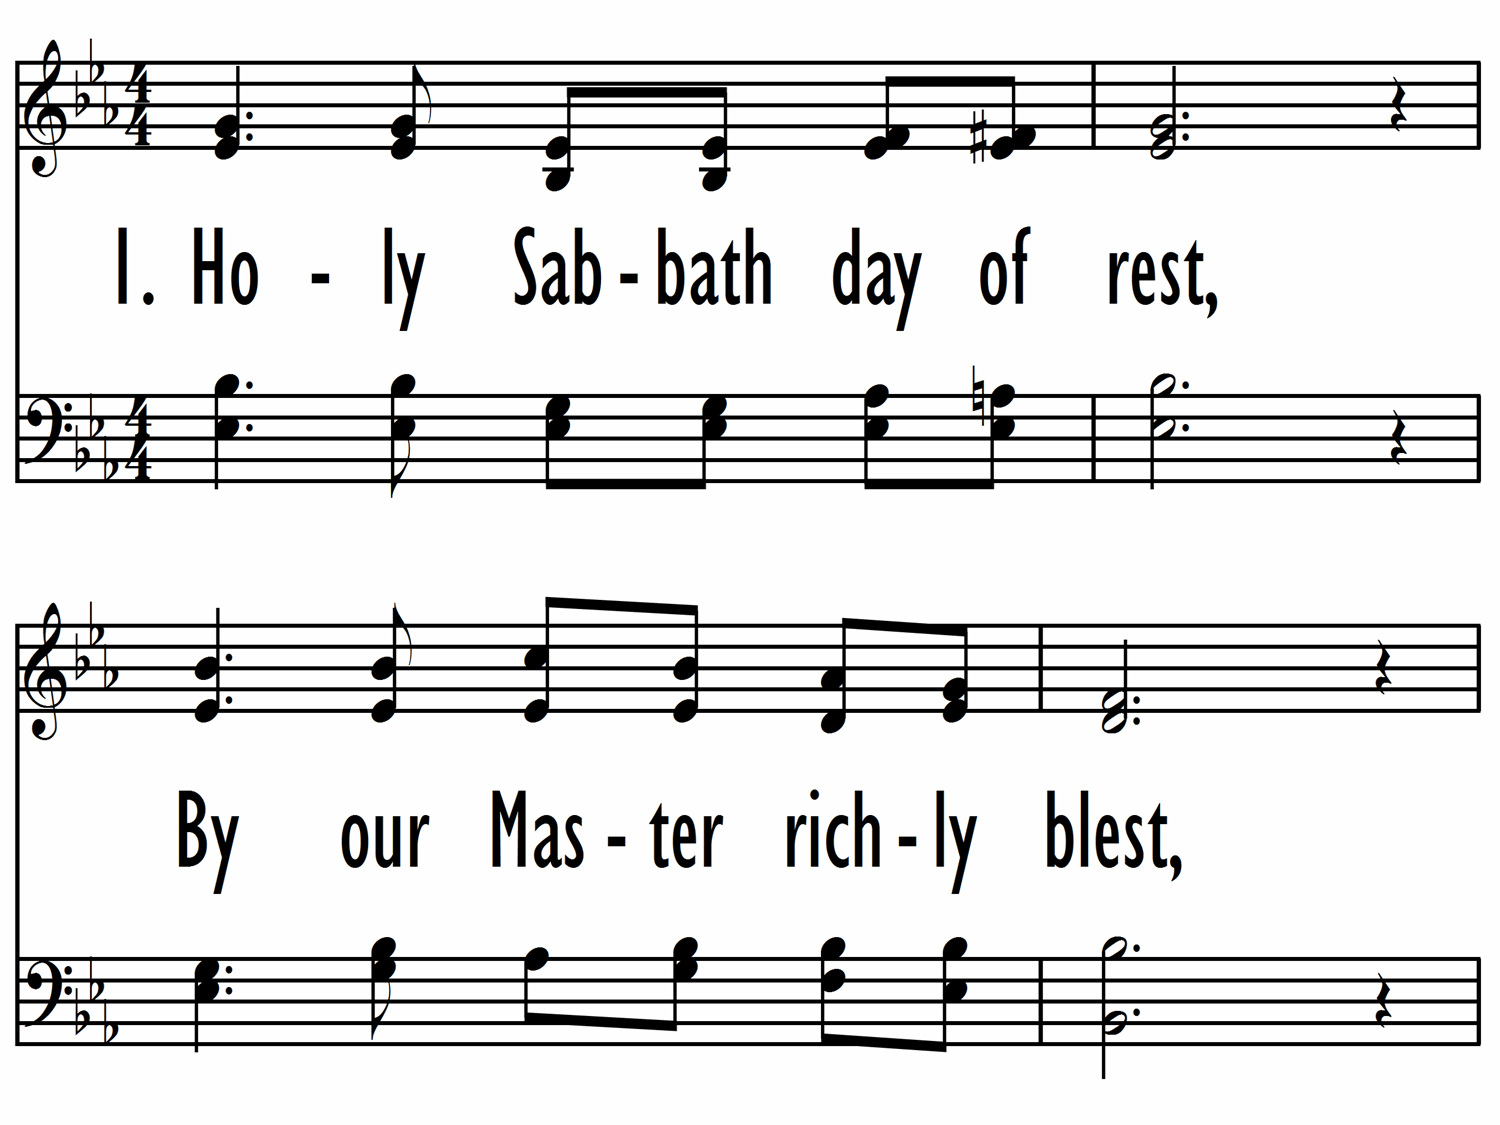 Holy Sabbath Day Of Rest By Our Master Richly Blest Hymnary Org